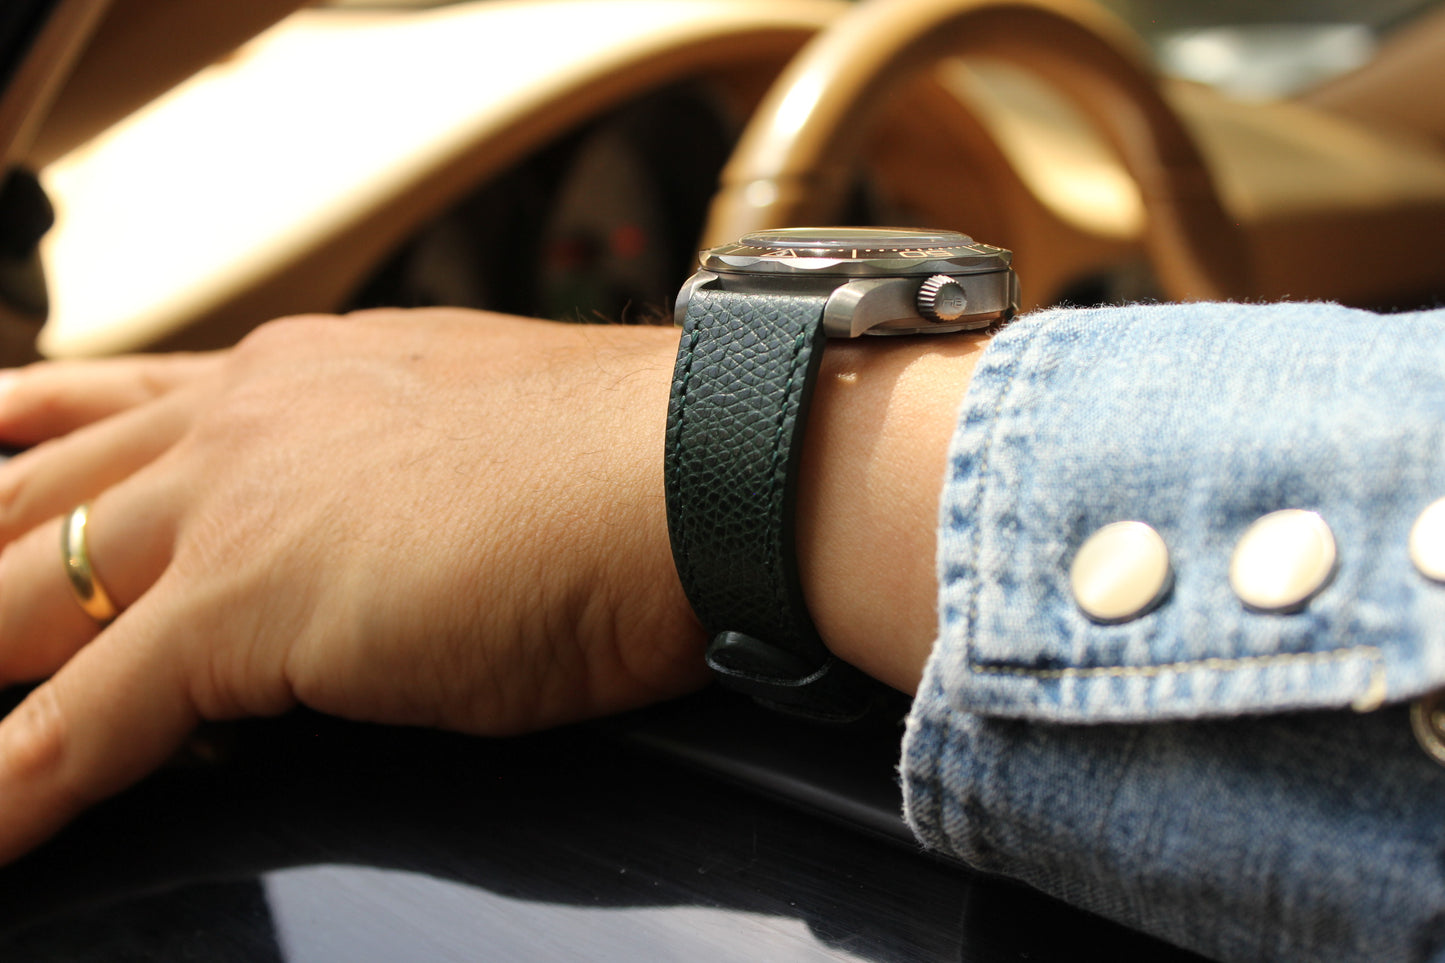 The Valleywood Watch Strap in Green